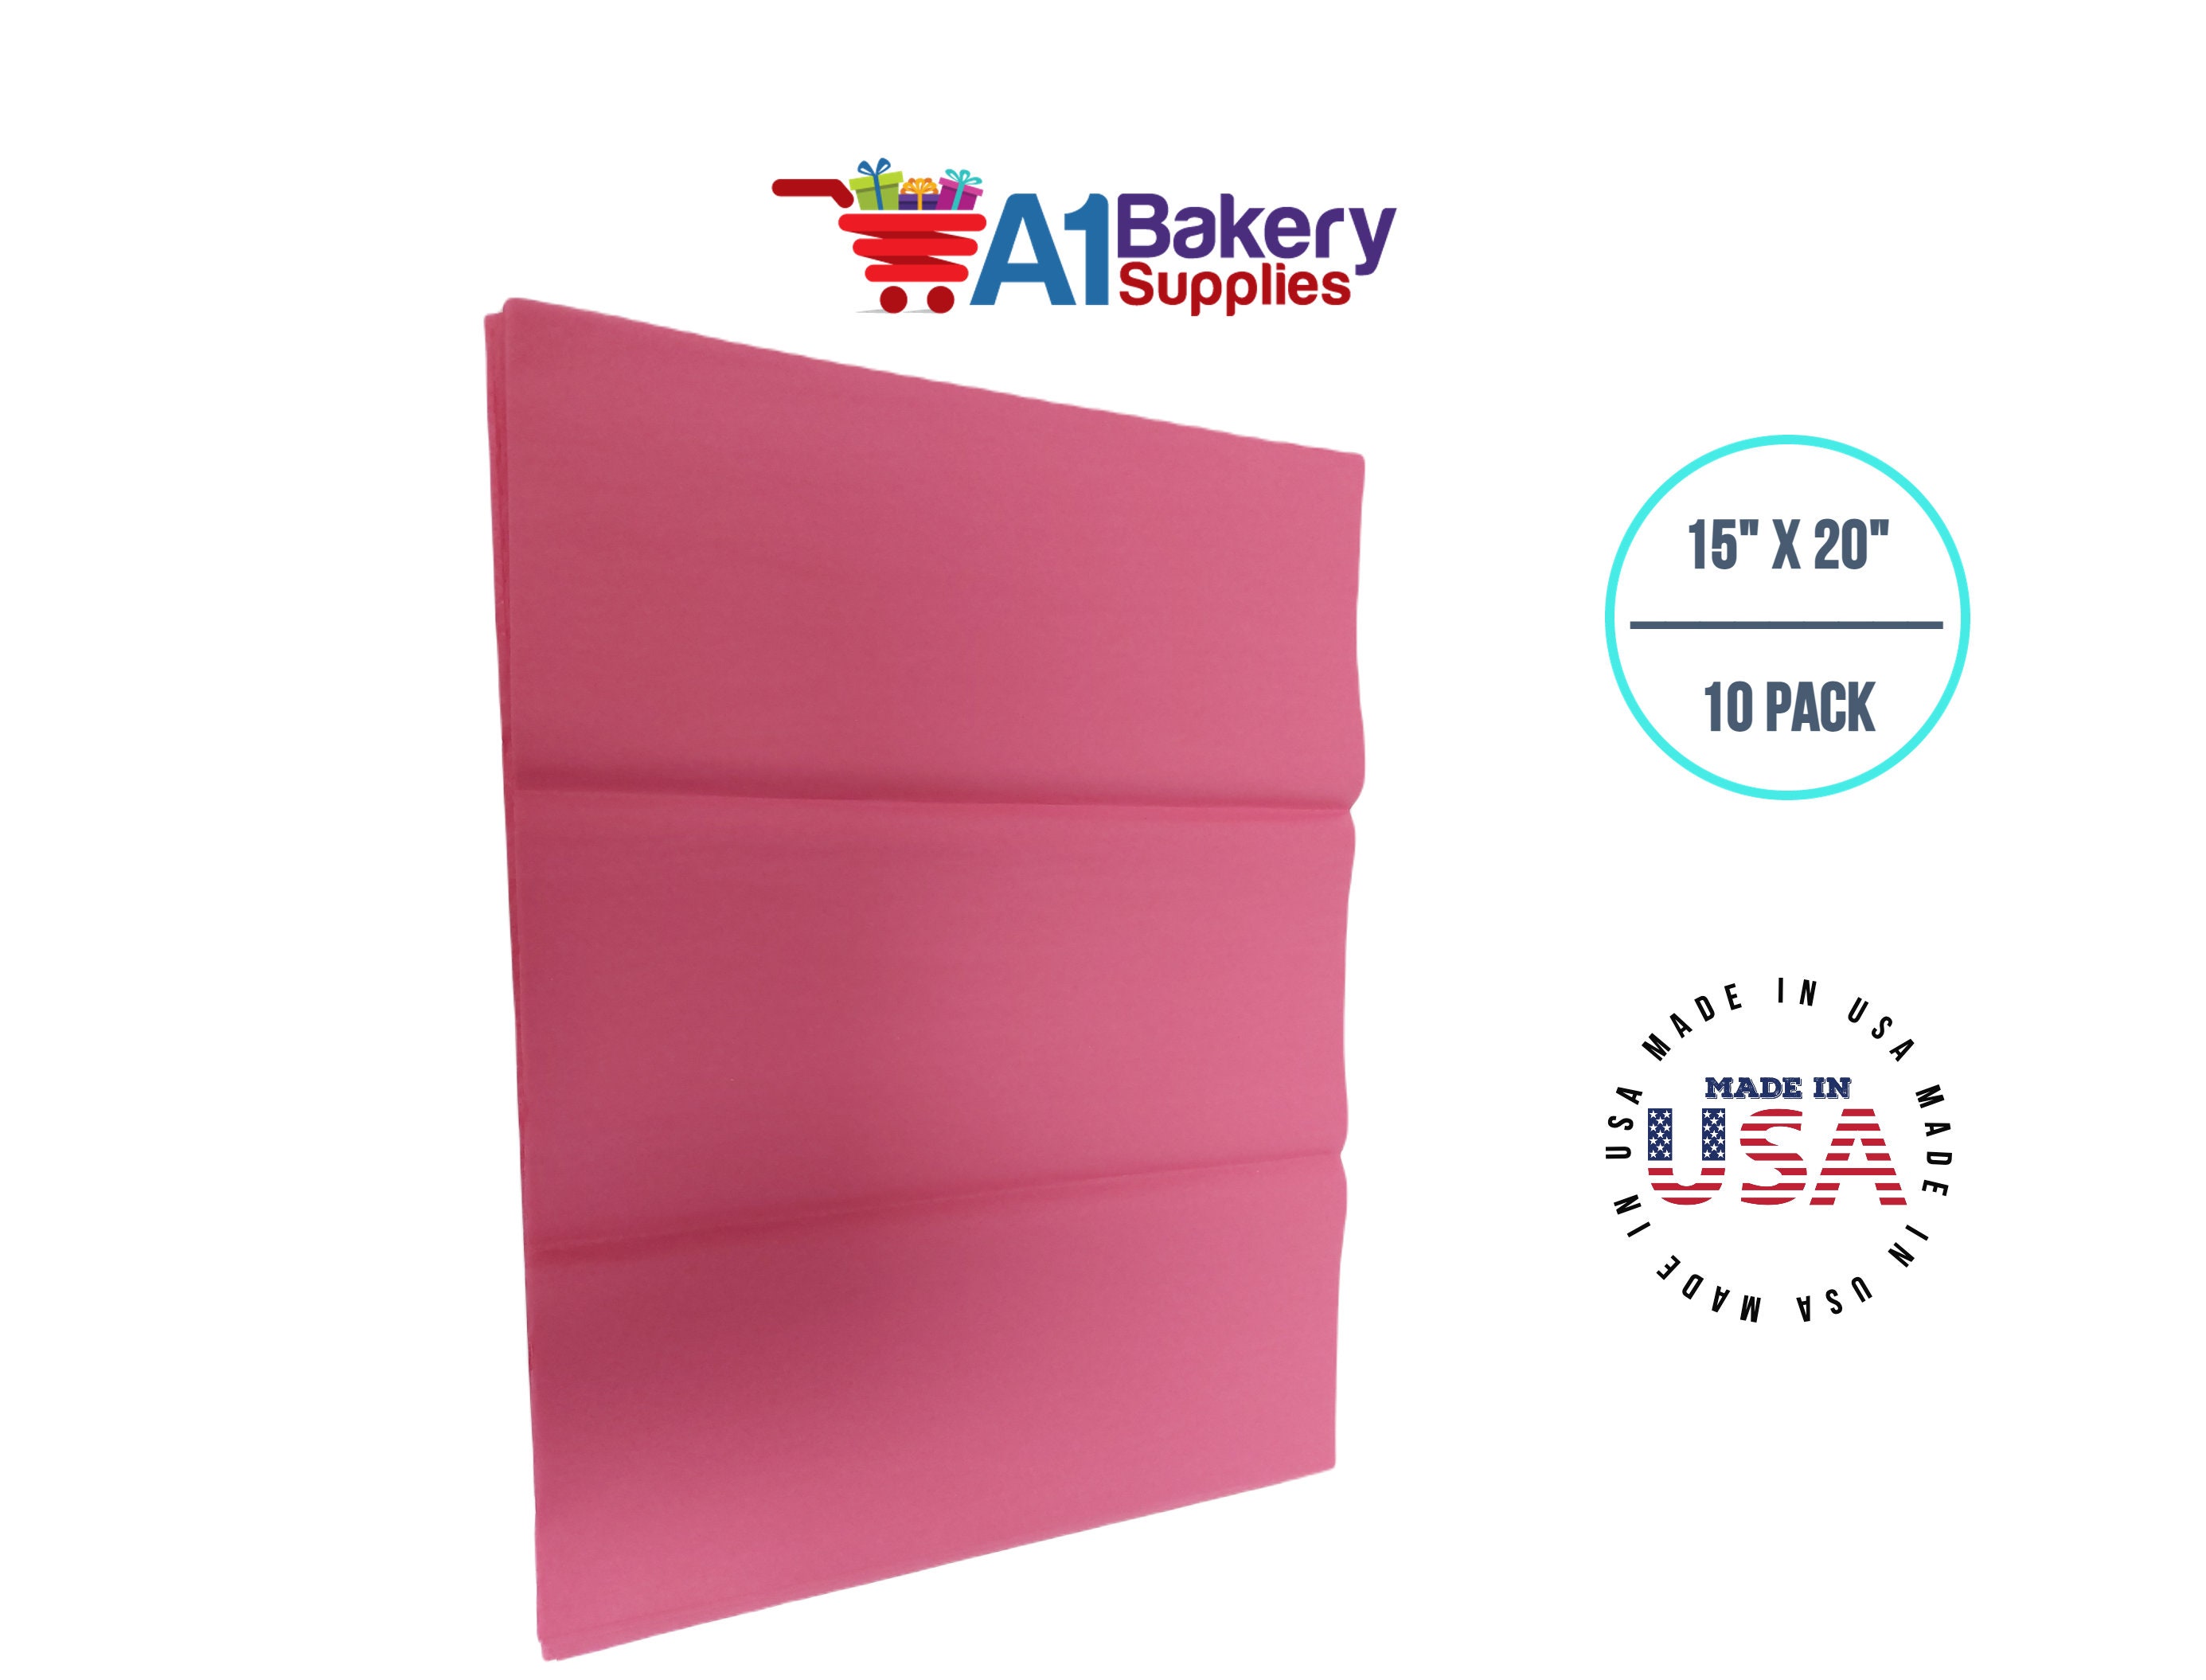 Feronia Packaging Hot Pink Tissue Paper Squares, Bulk 10 Sheets, Premium Gift Wrap and Art Supplies for Birthdays, Holidays, or Presents, Large 15